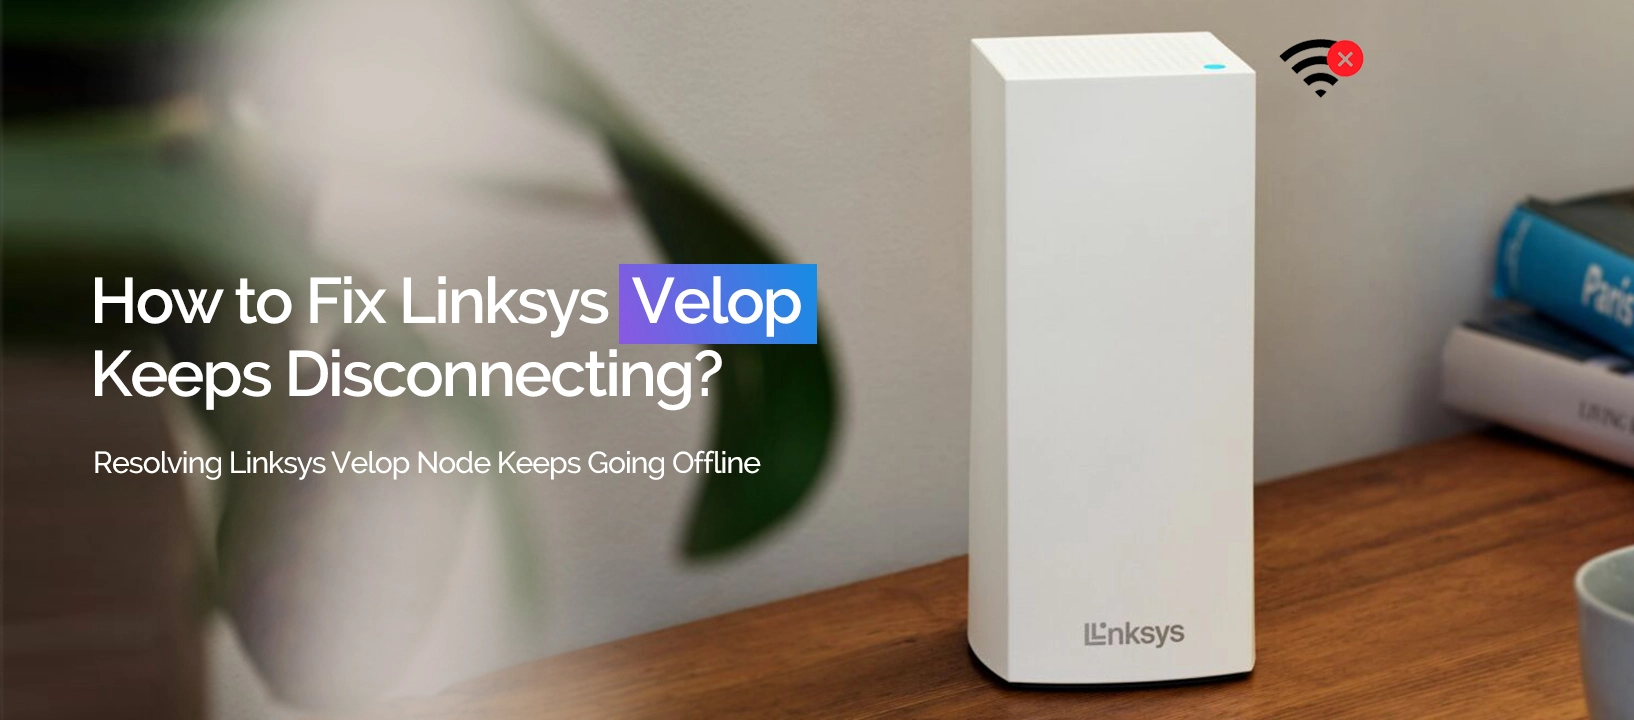 How to Fix Linksys Velop Keeps Disconnecting